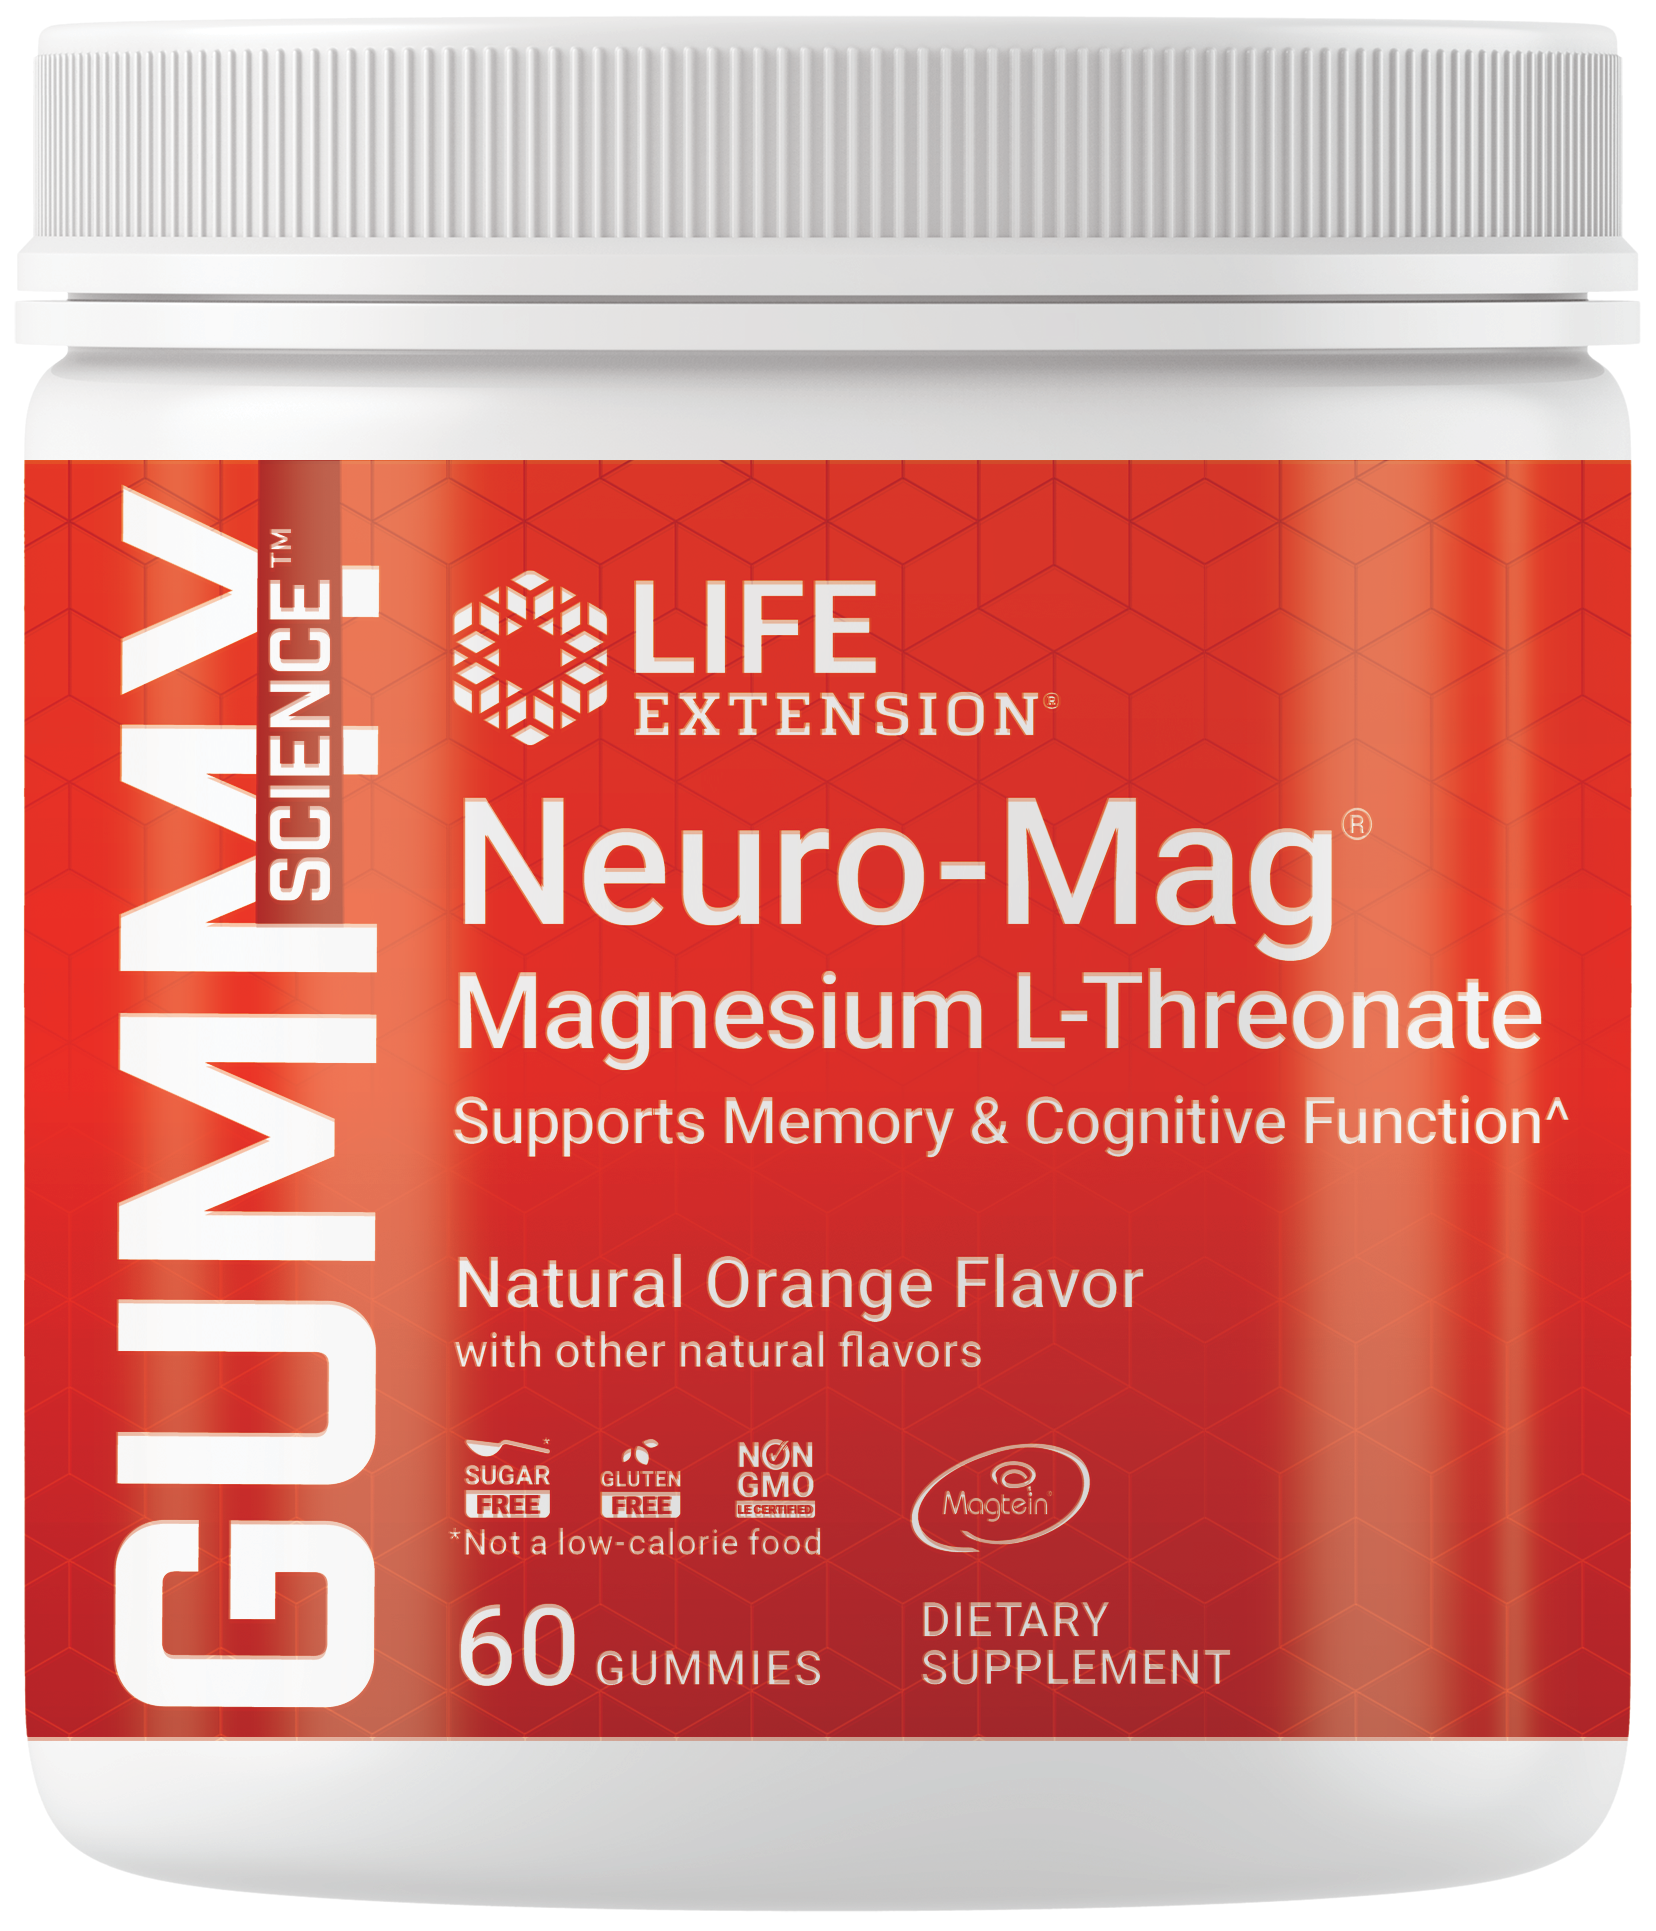 Gummy Science™ Neuro-Mag® Magnesium L-Threonate, sugar-free orange-flavored gummies with ultra-absorbable magnesium.